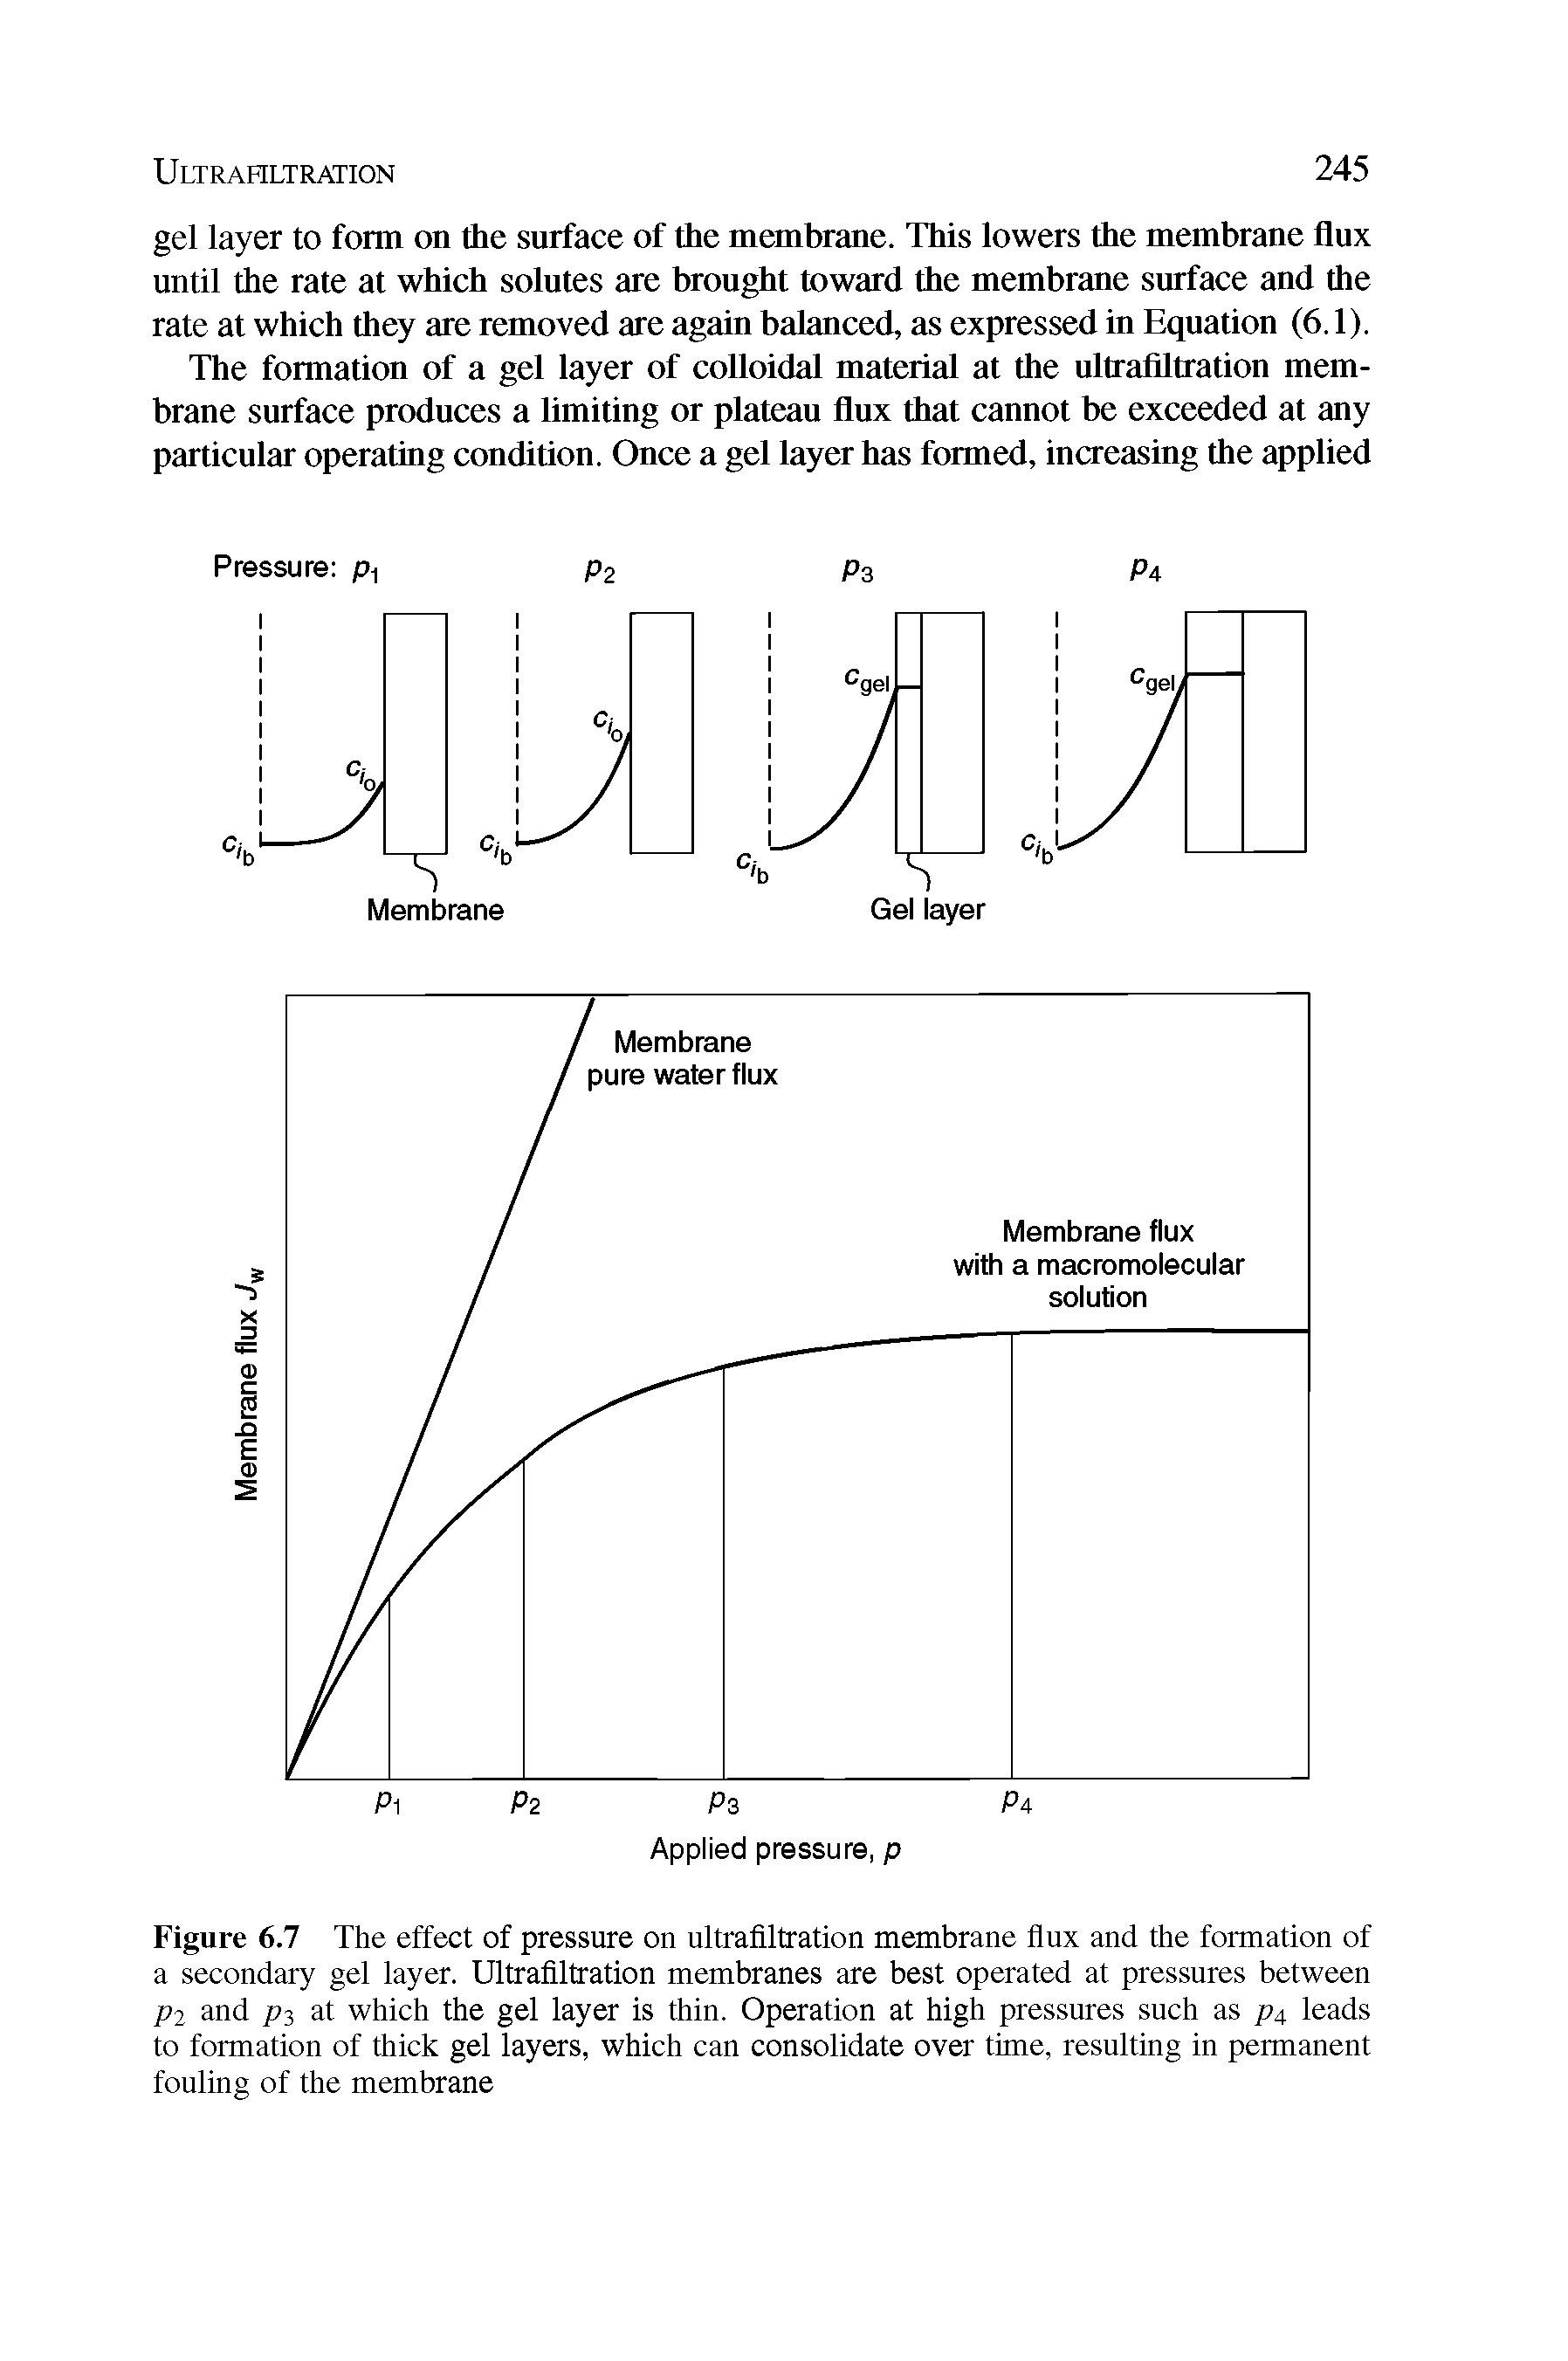 Figure 6.7 The effect of pressure on ultrafiltration membrane flux and the formation of a secondary gel layer. Ultrafiltration membranes are best operated at pressures between p2 and p3 at which the gel layer is thin. Operation at high pressures such as p4 leads to formation of thick gel layers, which can consolidate over time, resulting in permanent fouling of the membrane...